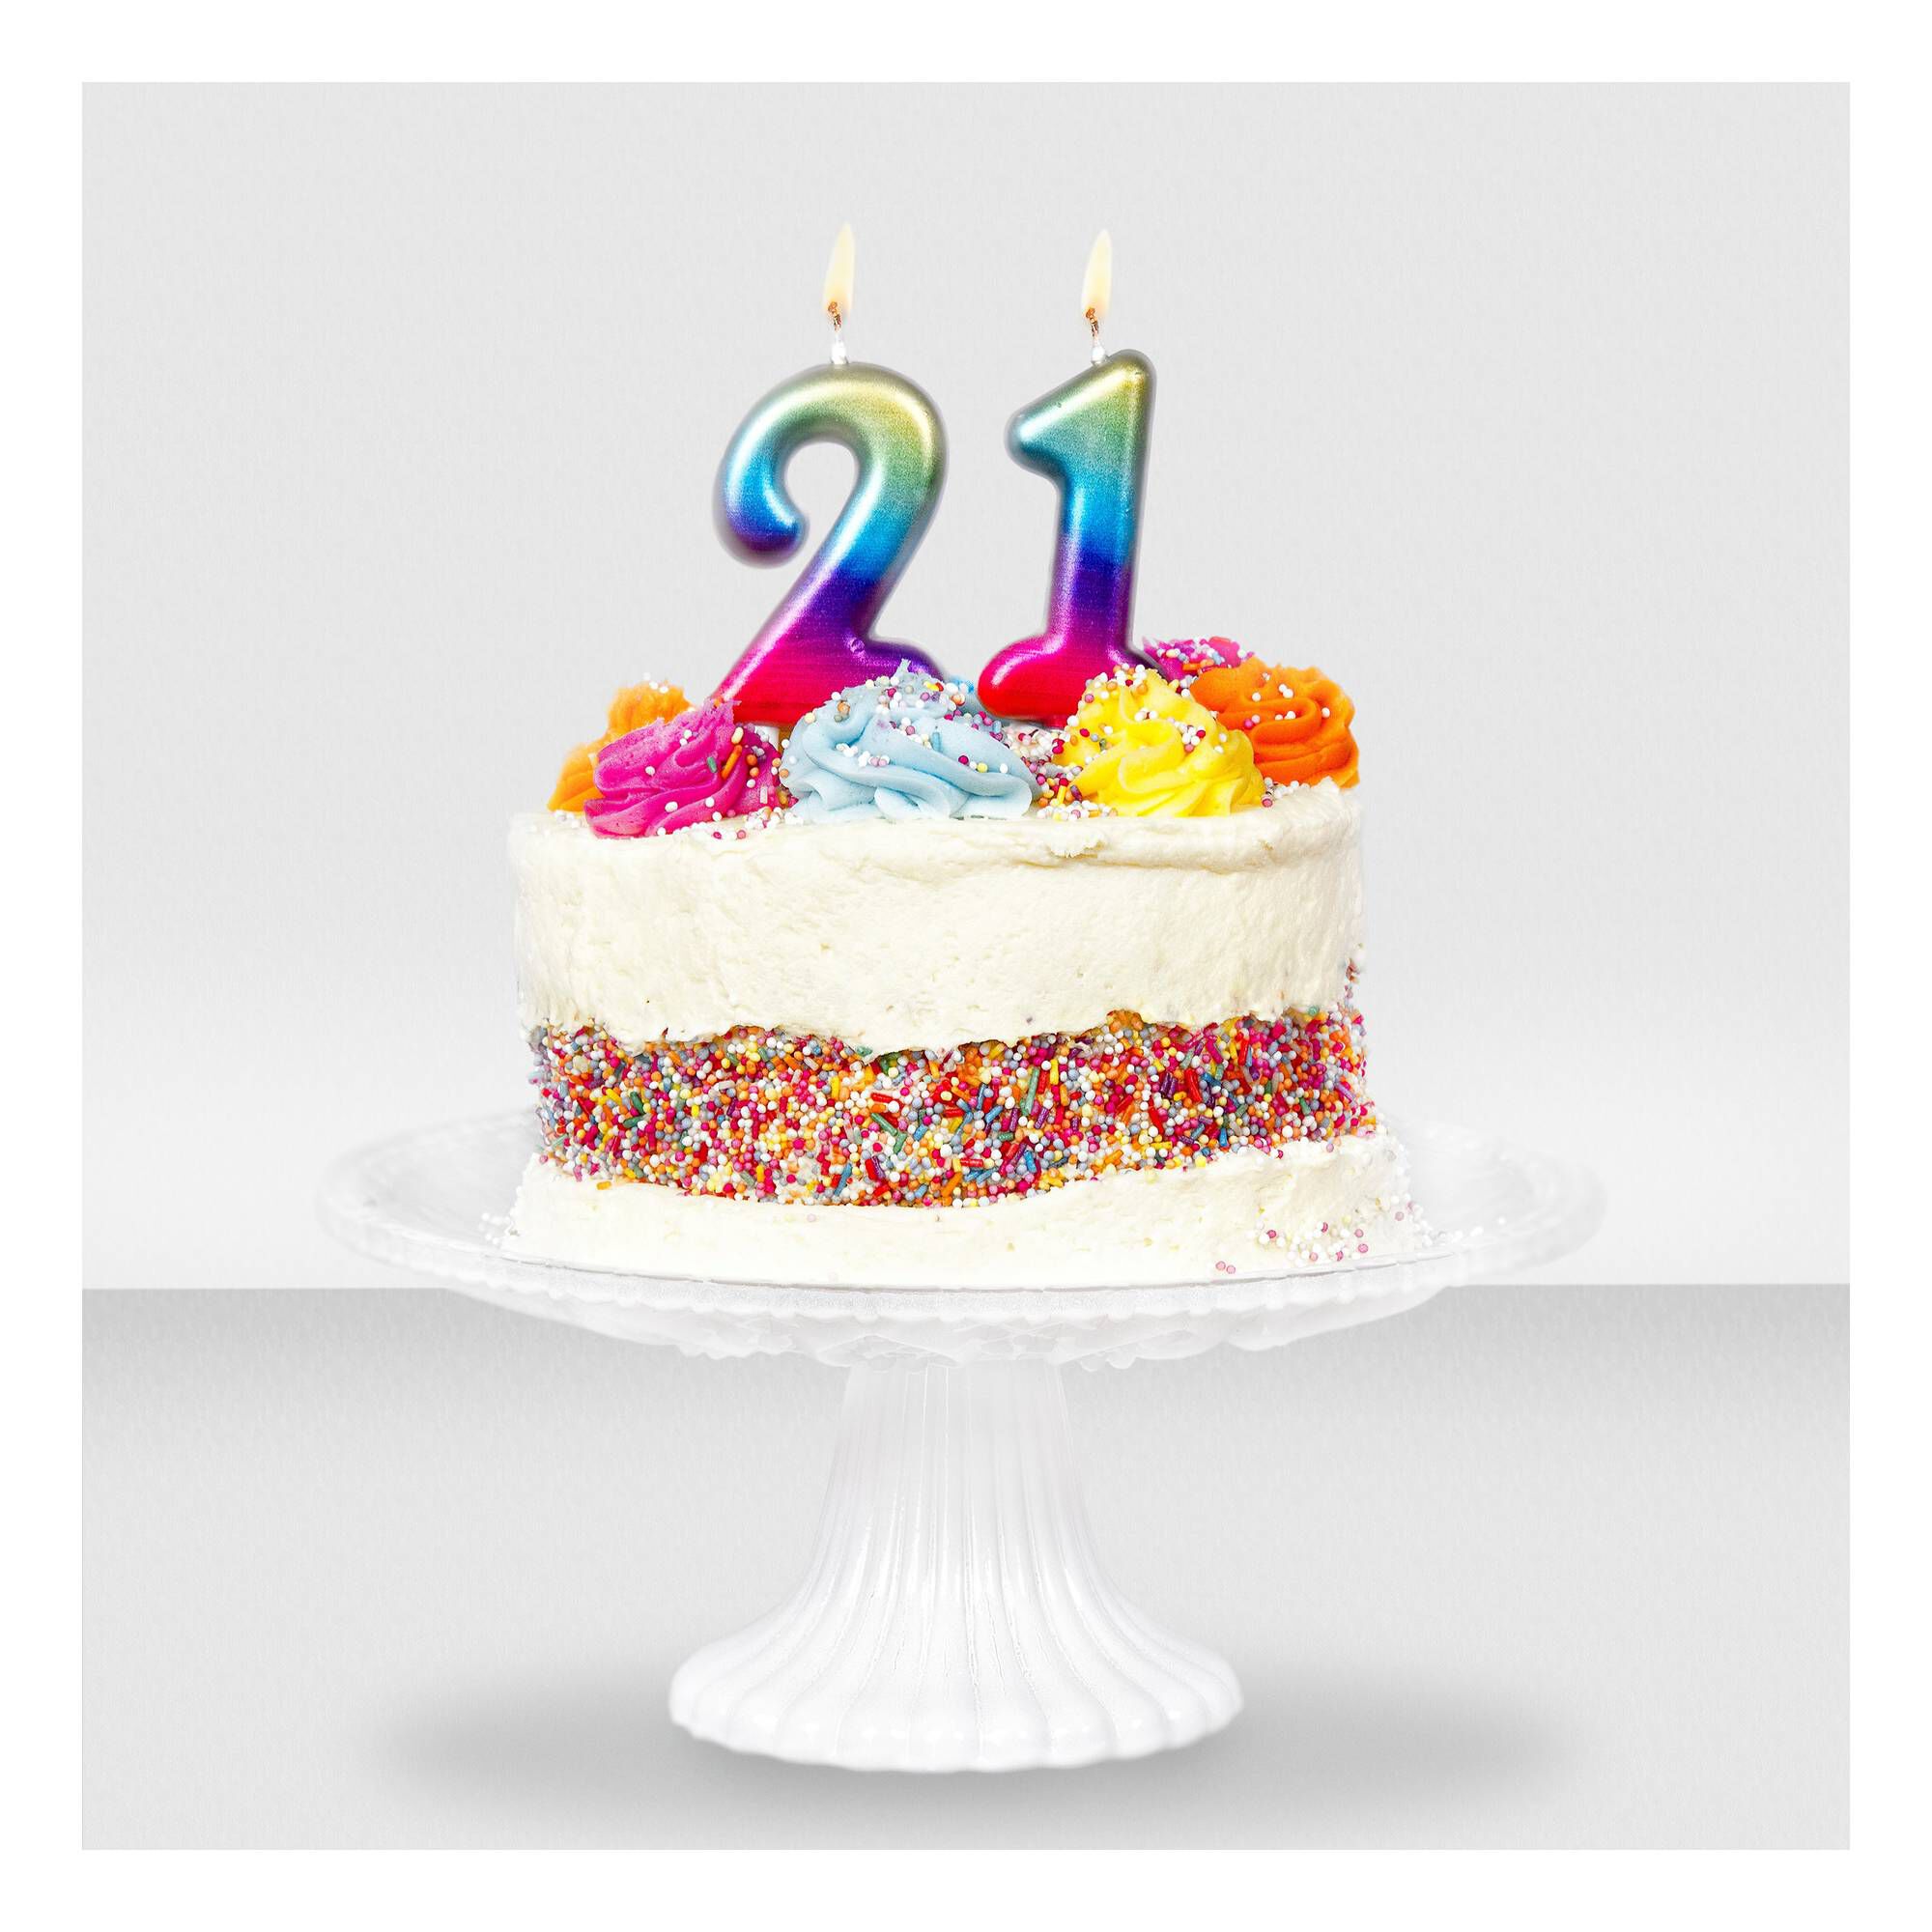 Premium Vector | Happy birthday cake with candle number